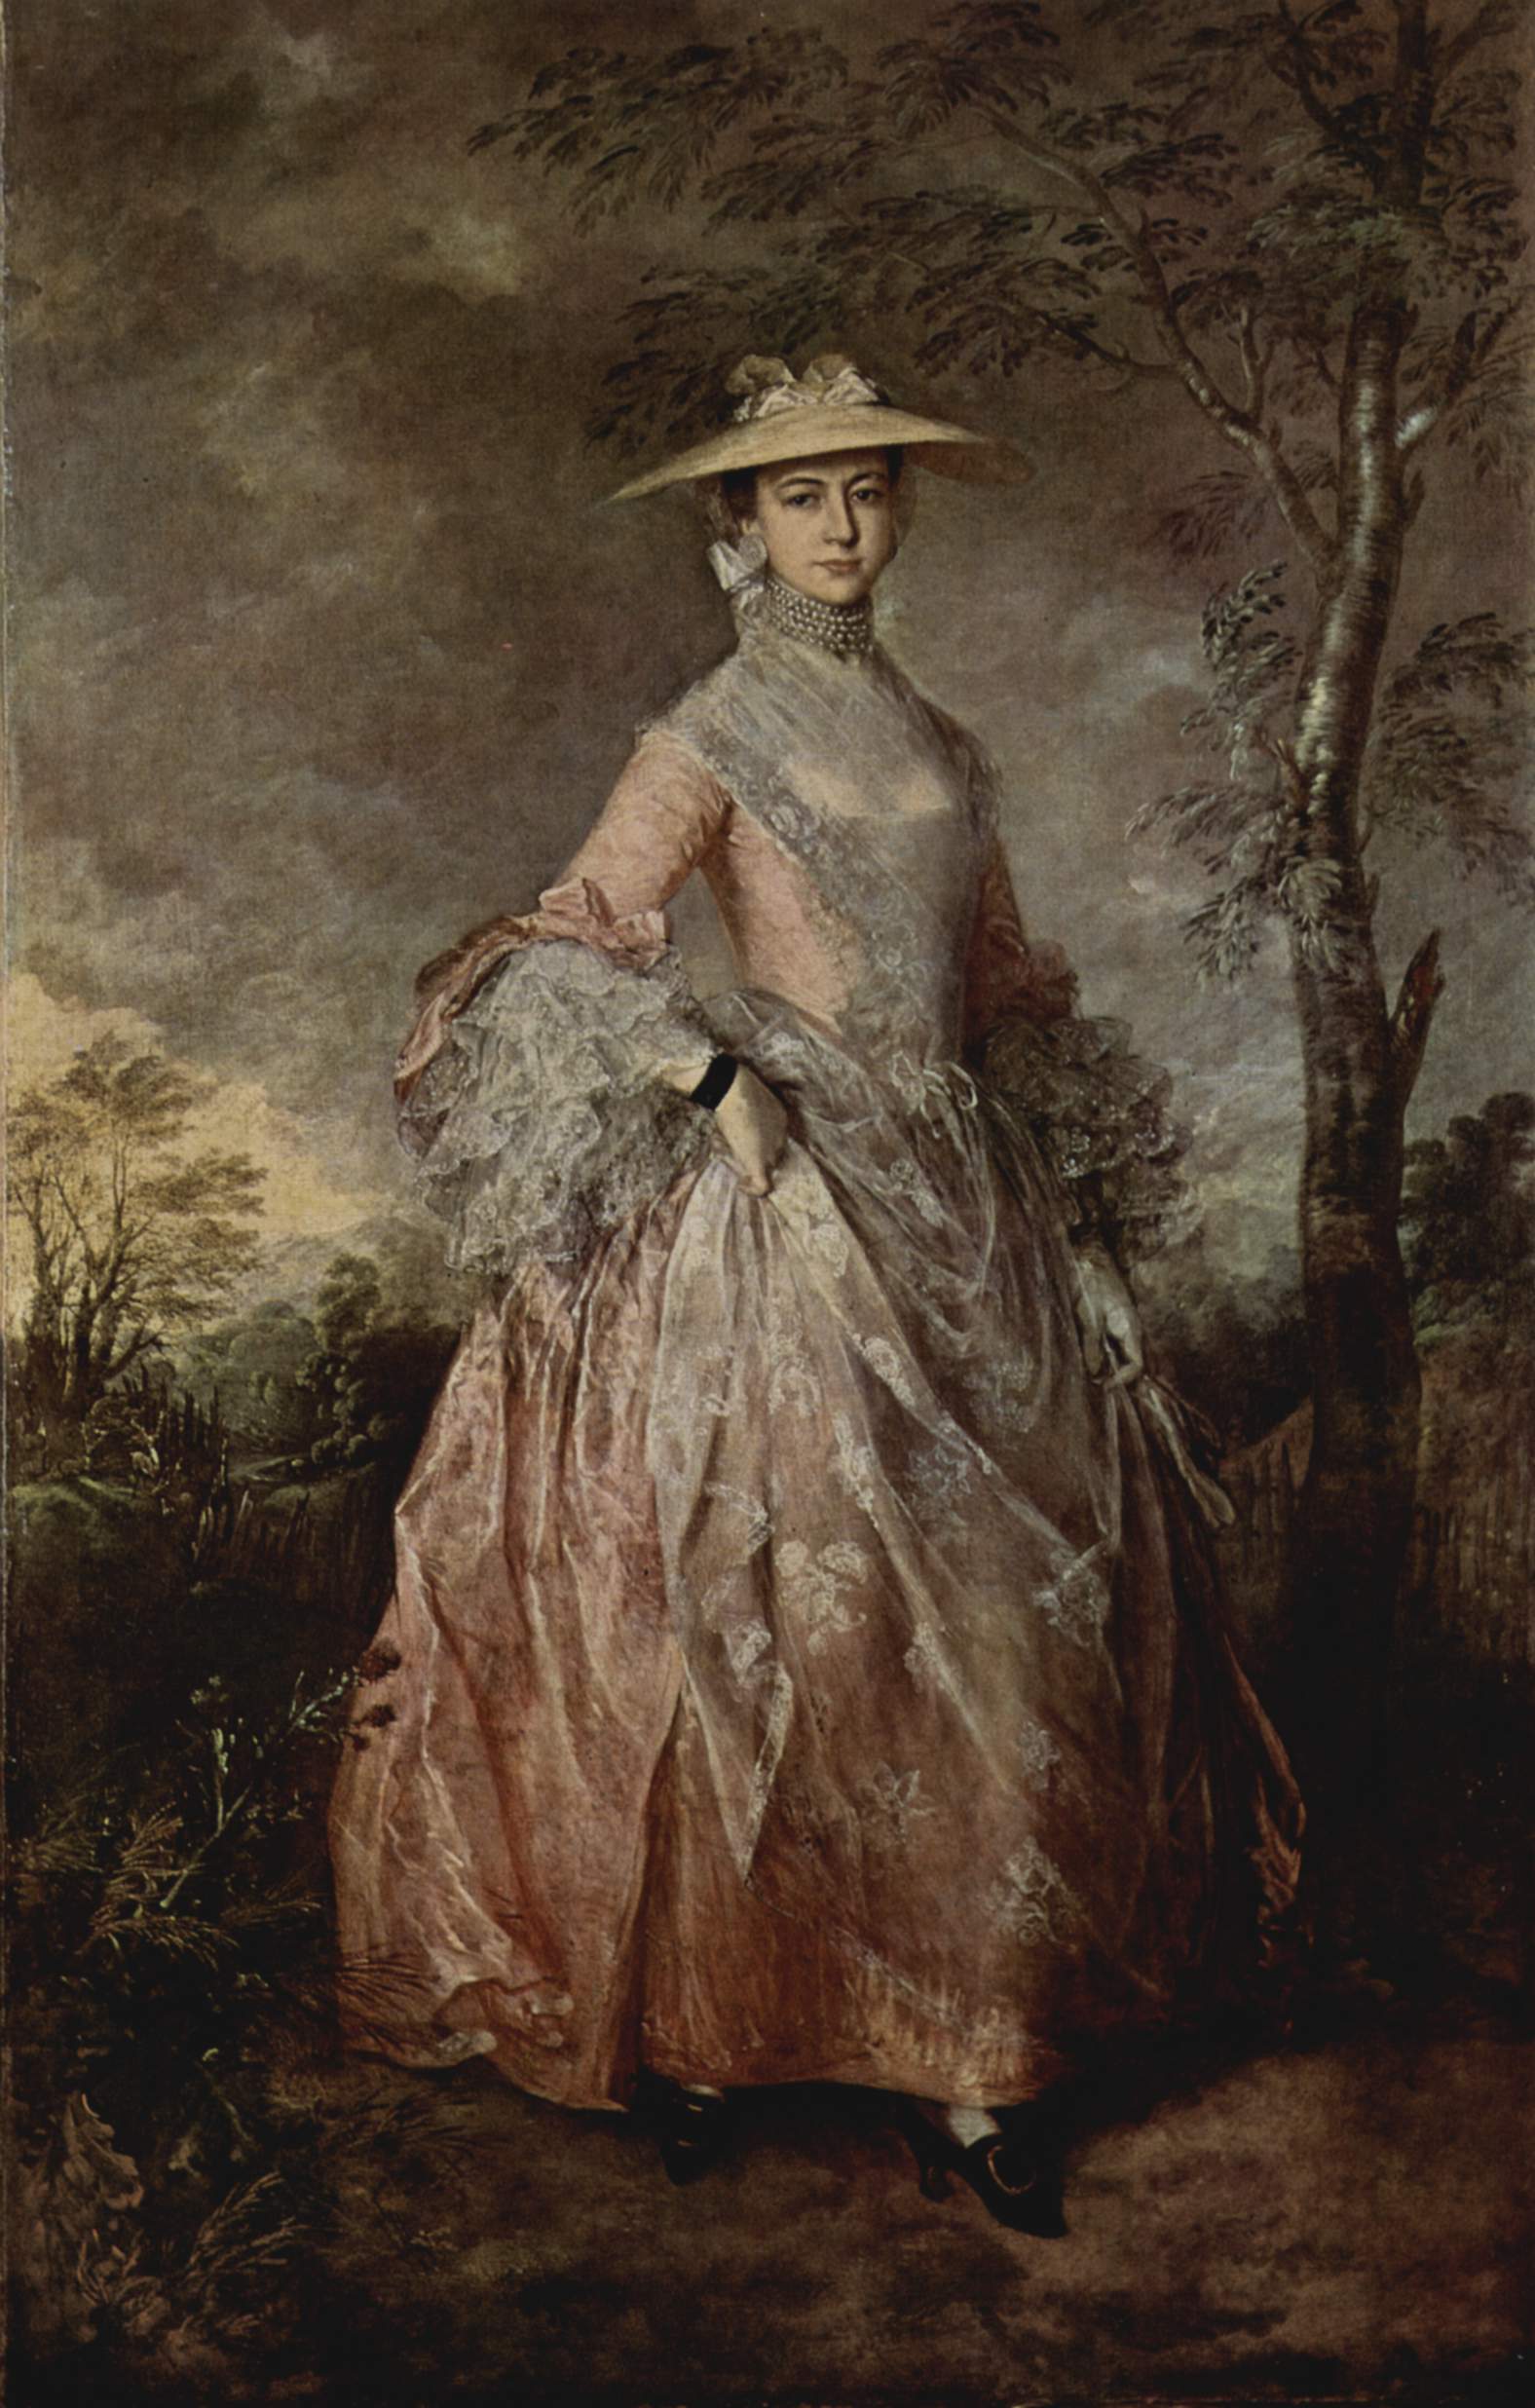 Portrait of Mary Countess Howe, c.1760 - Thomas Gainsborough - WikiArt.org